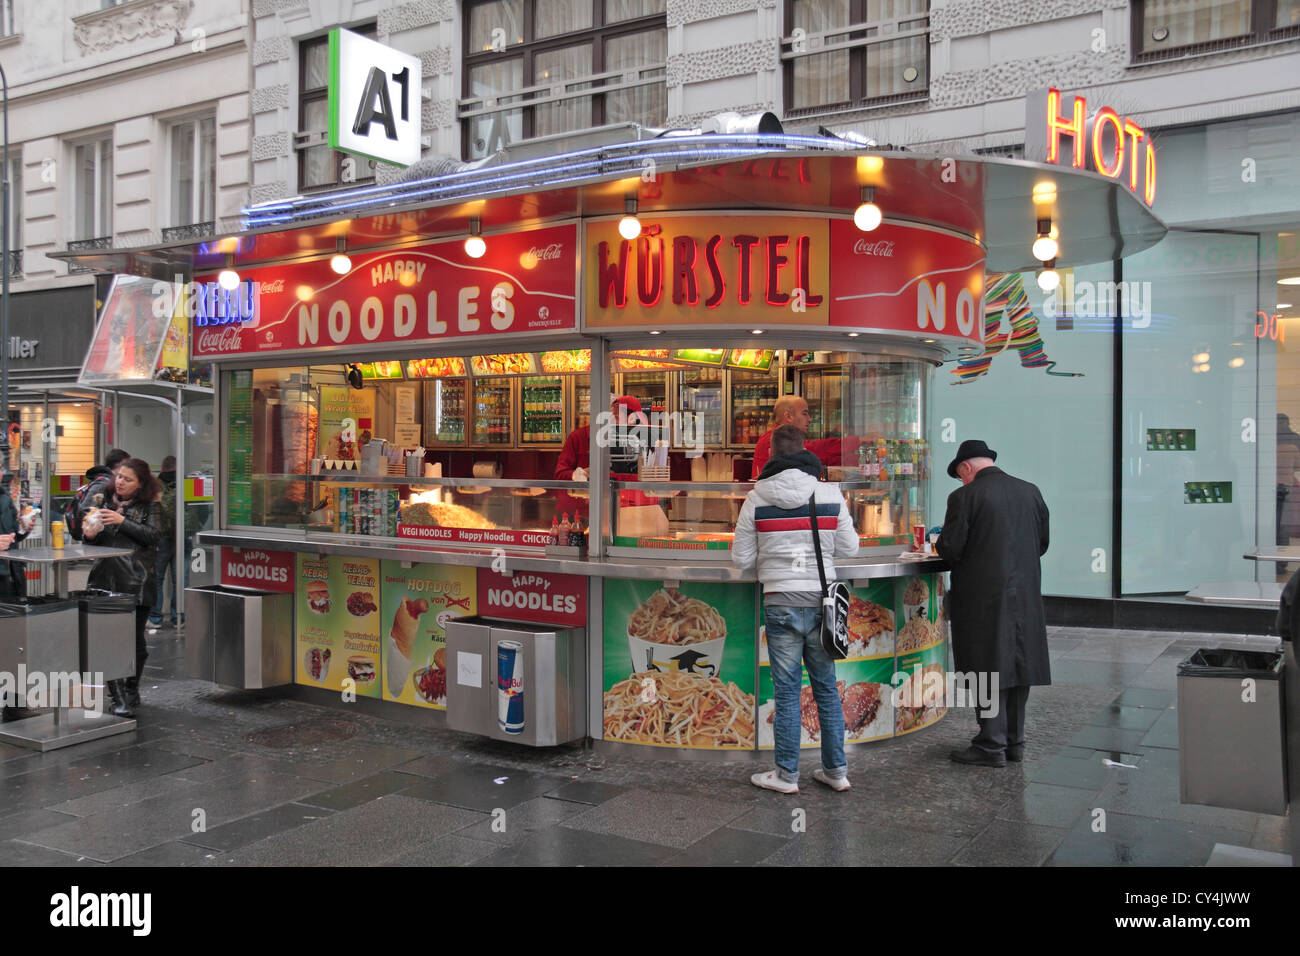 A Wurstel/hot dog and noodle fast food kiosk in Vienna, Austria. Stock Photo